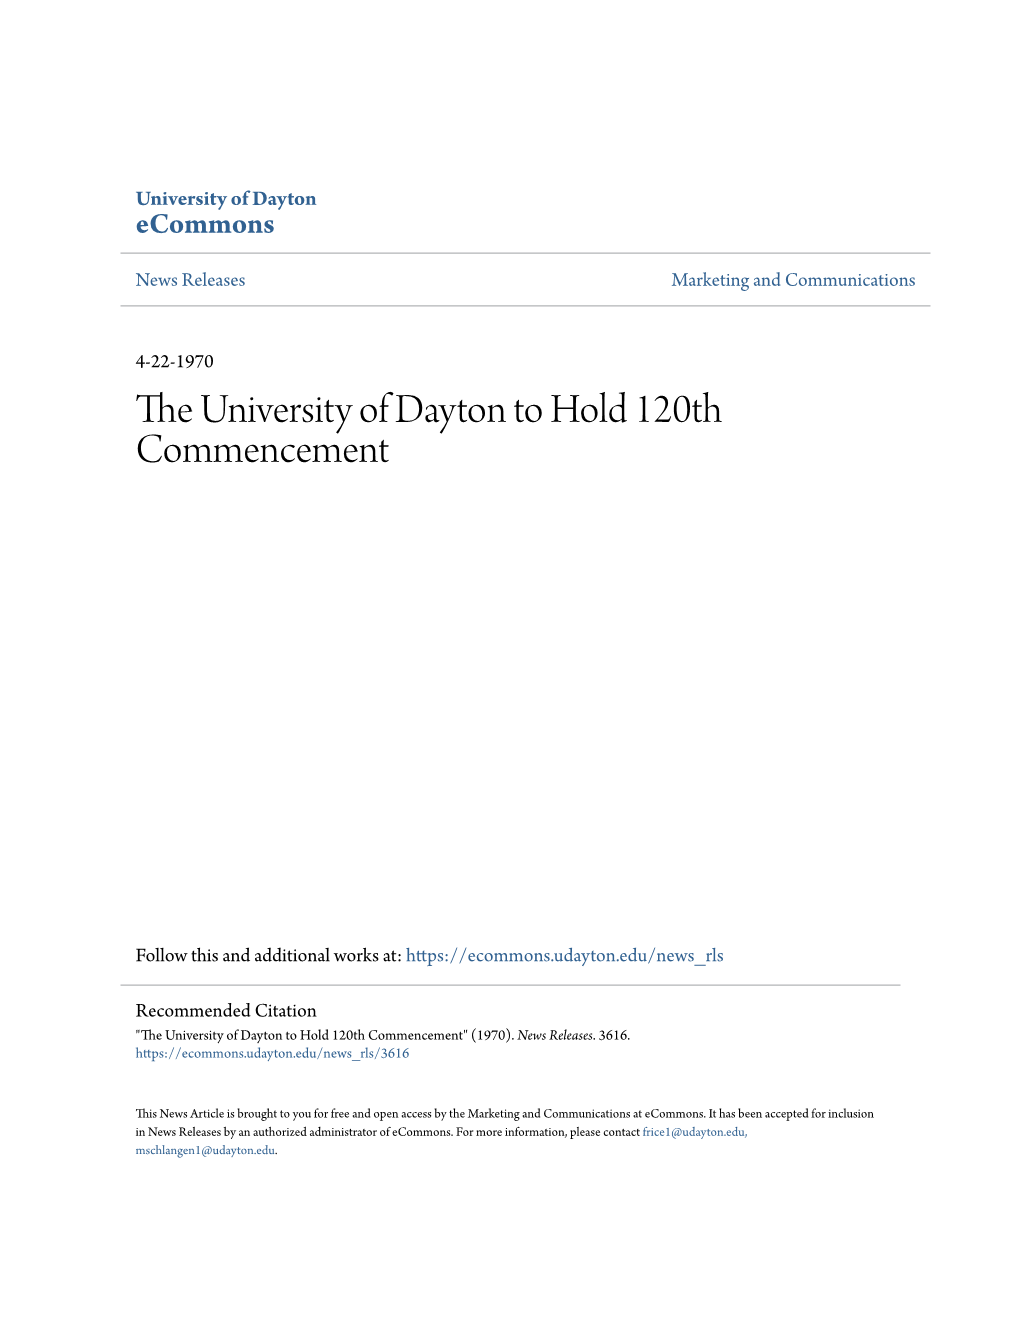 The University of Dayton to Hold 120Th Commencement